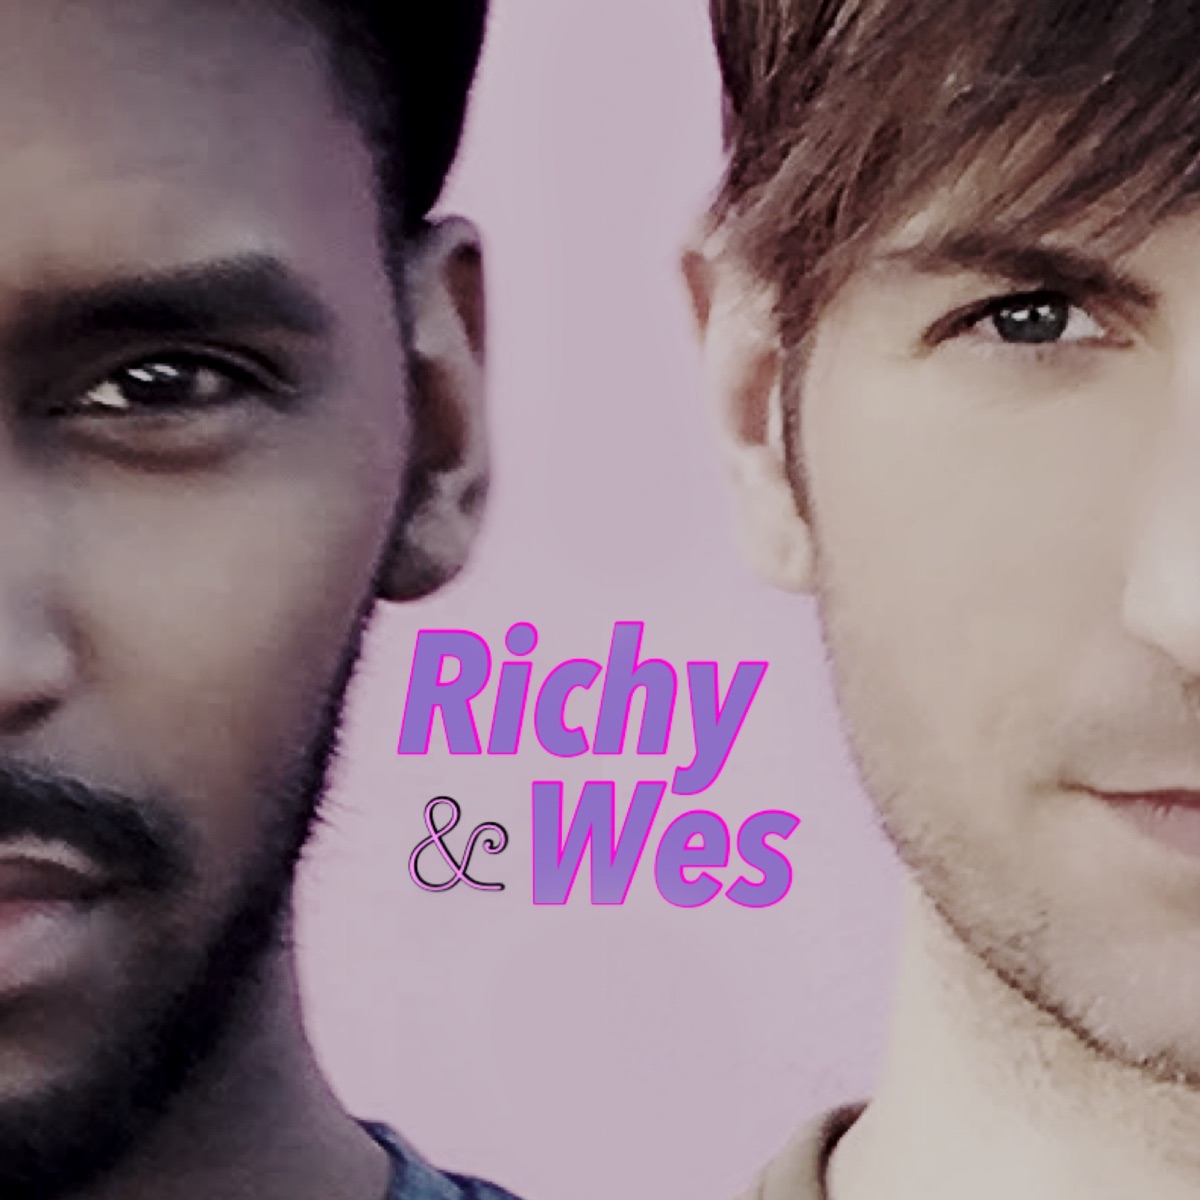 OnlyFans! + Chris Evans, Tom Cruise, Elon Musk, Joe Exotic, Chrissy Teigen,  Britney, Wendy WIlliams, Naomi Campbell, Tyra Banks, Top Model,  Spider-Verse â€“ Richy and Wes â€“ Podcast â€“ Podtail